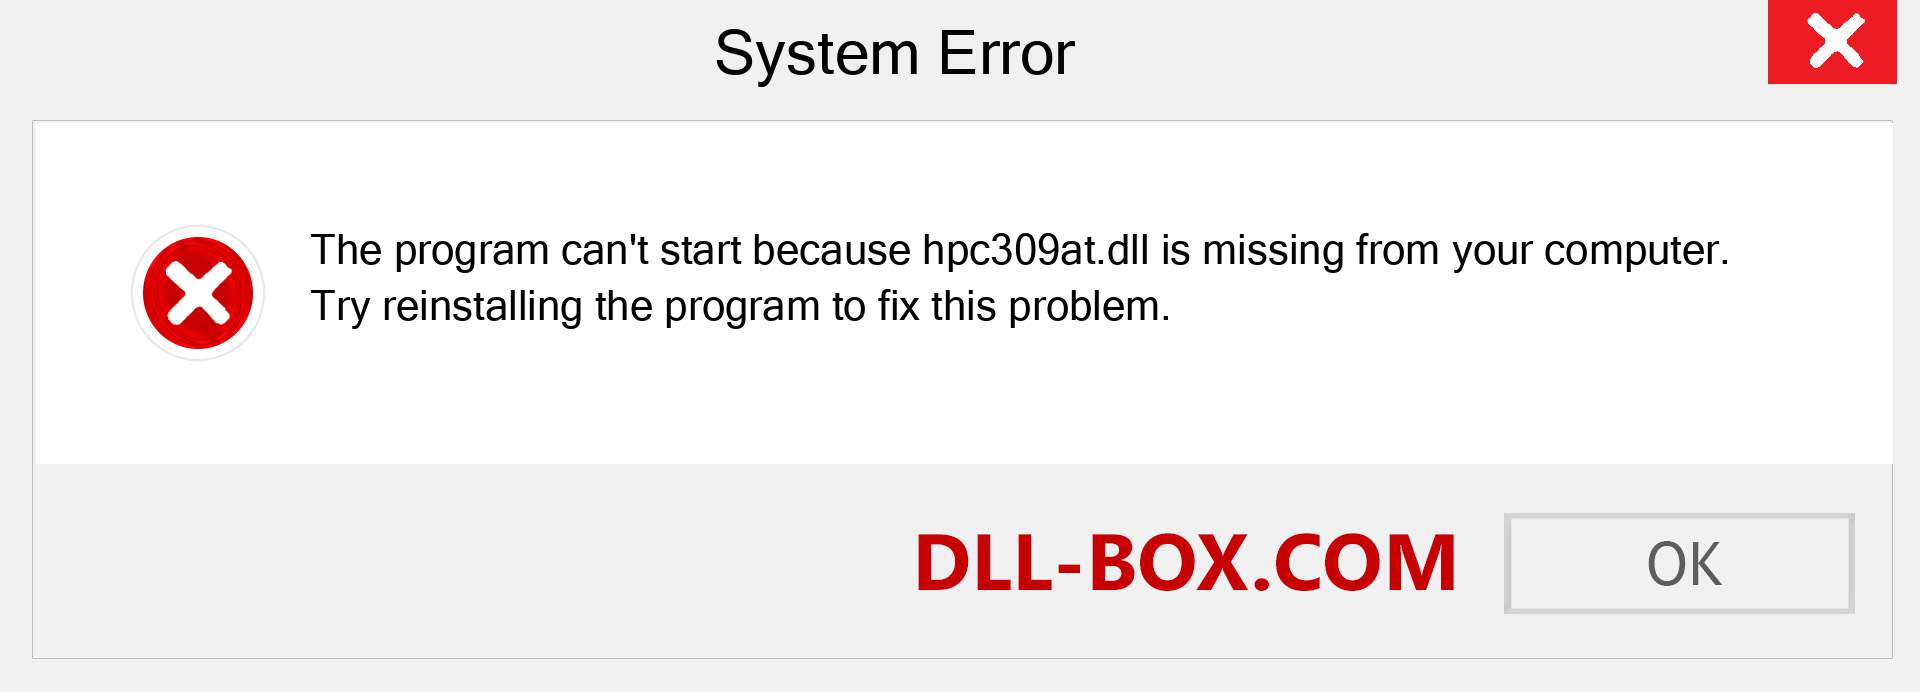  hpc309at.dll file is missing?. Download for Windows 7, 8, 10 - Fix  hpc309at dll Missing Error on Windows, photos, images